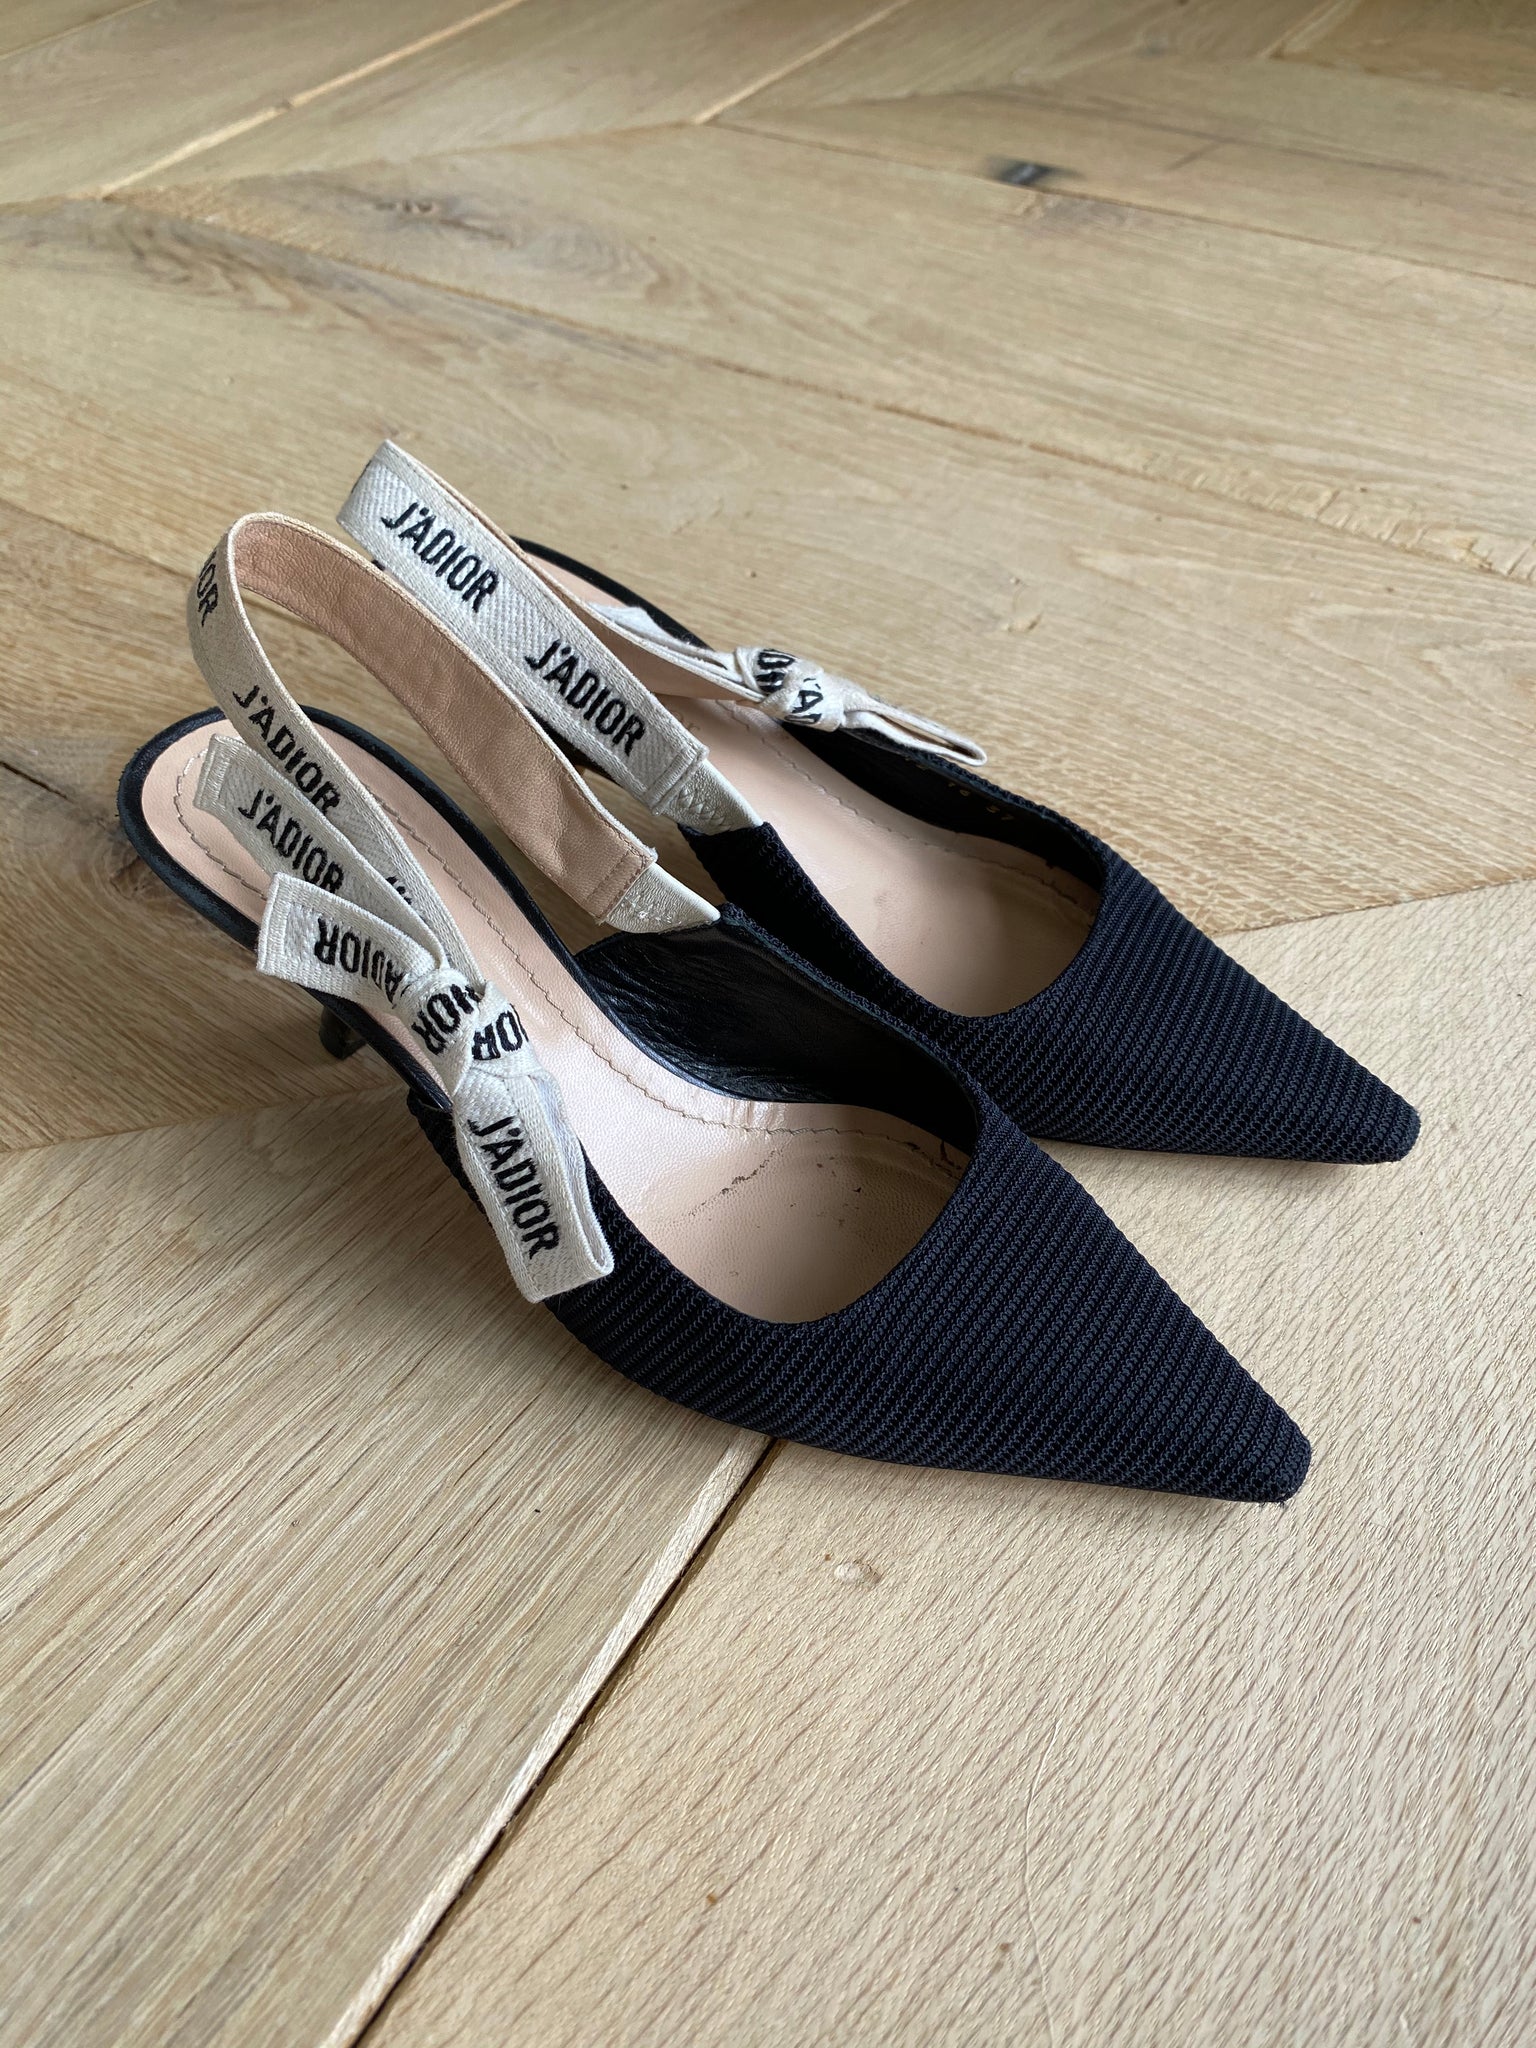 CHRISTIAN DIOR shoes – Lorna Luxe Closet